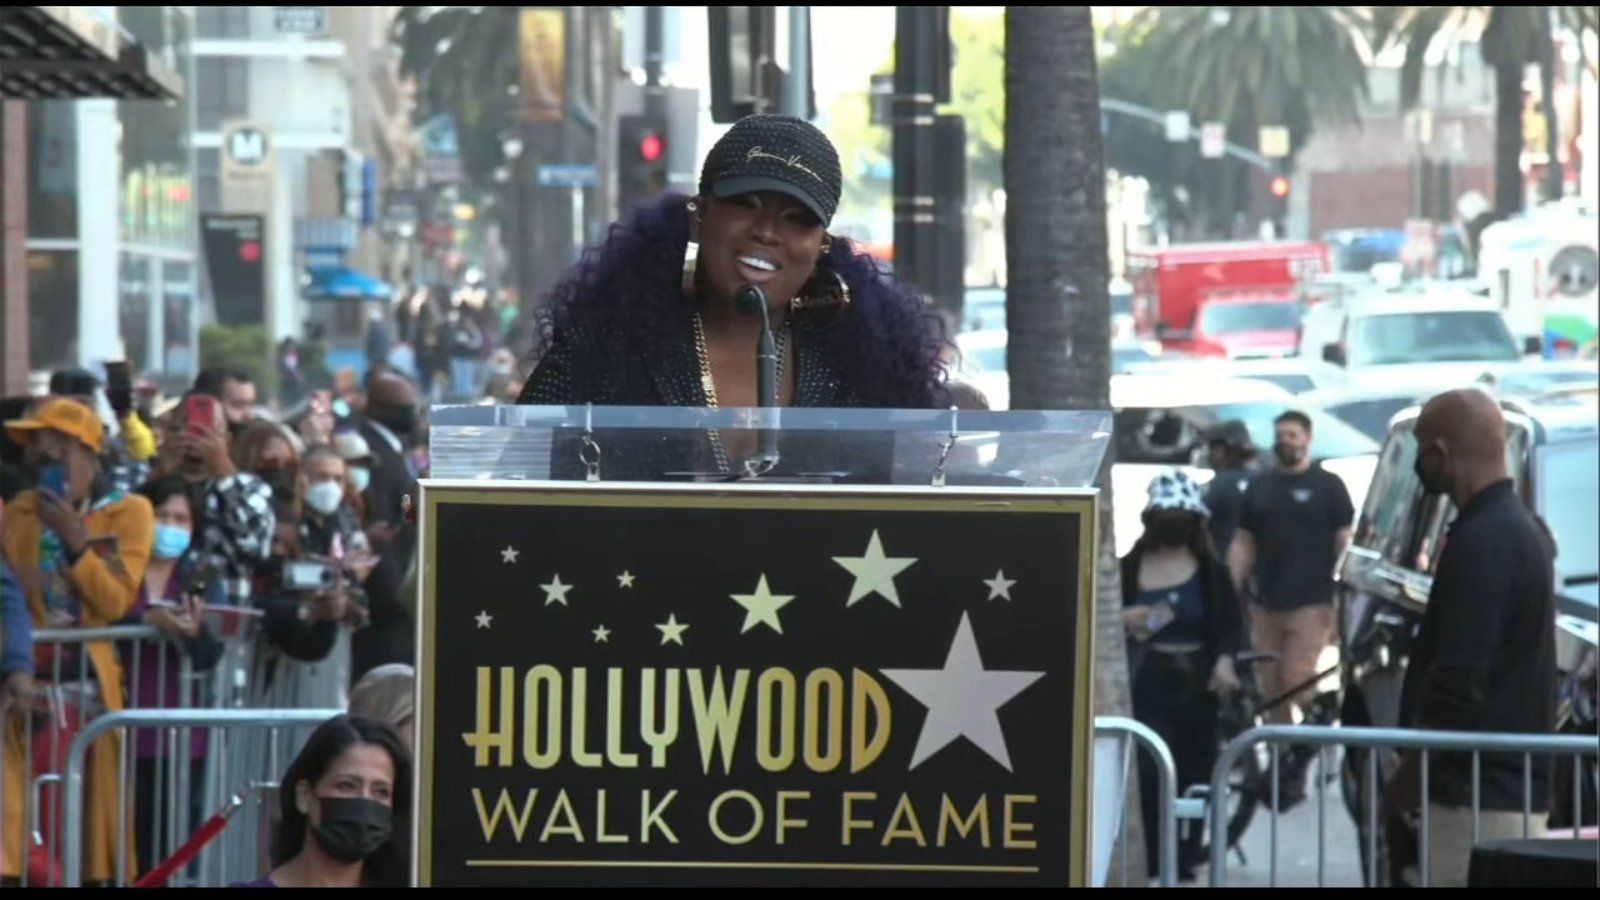 Missy Elliott says she's 'humbled' by her star on the Hollywood Walk of Fame